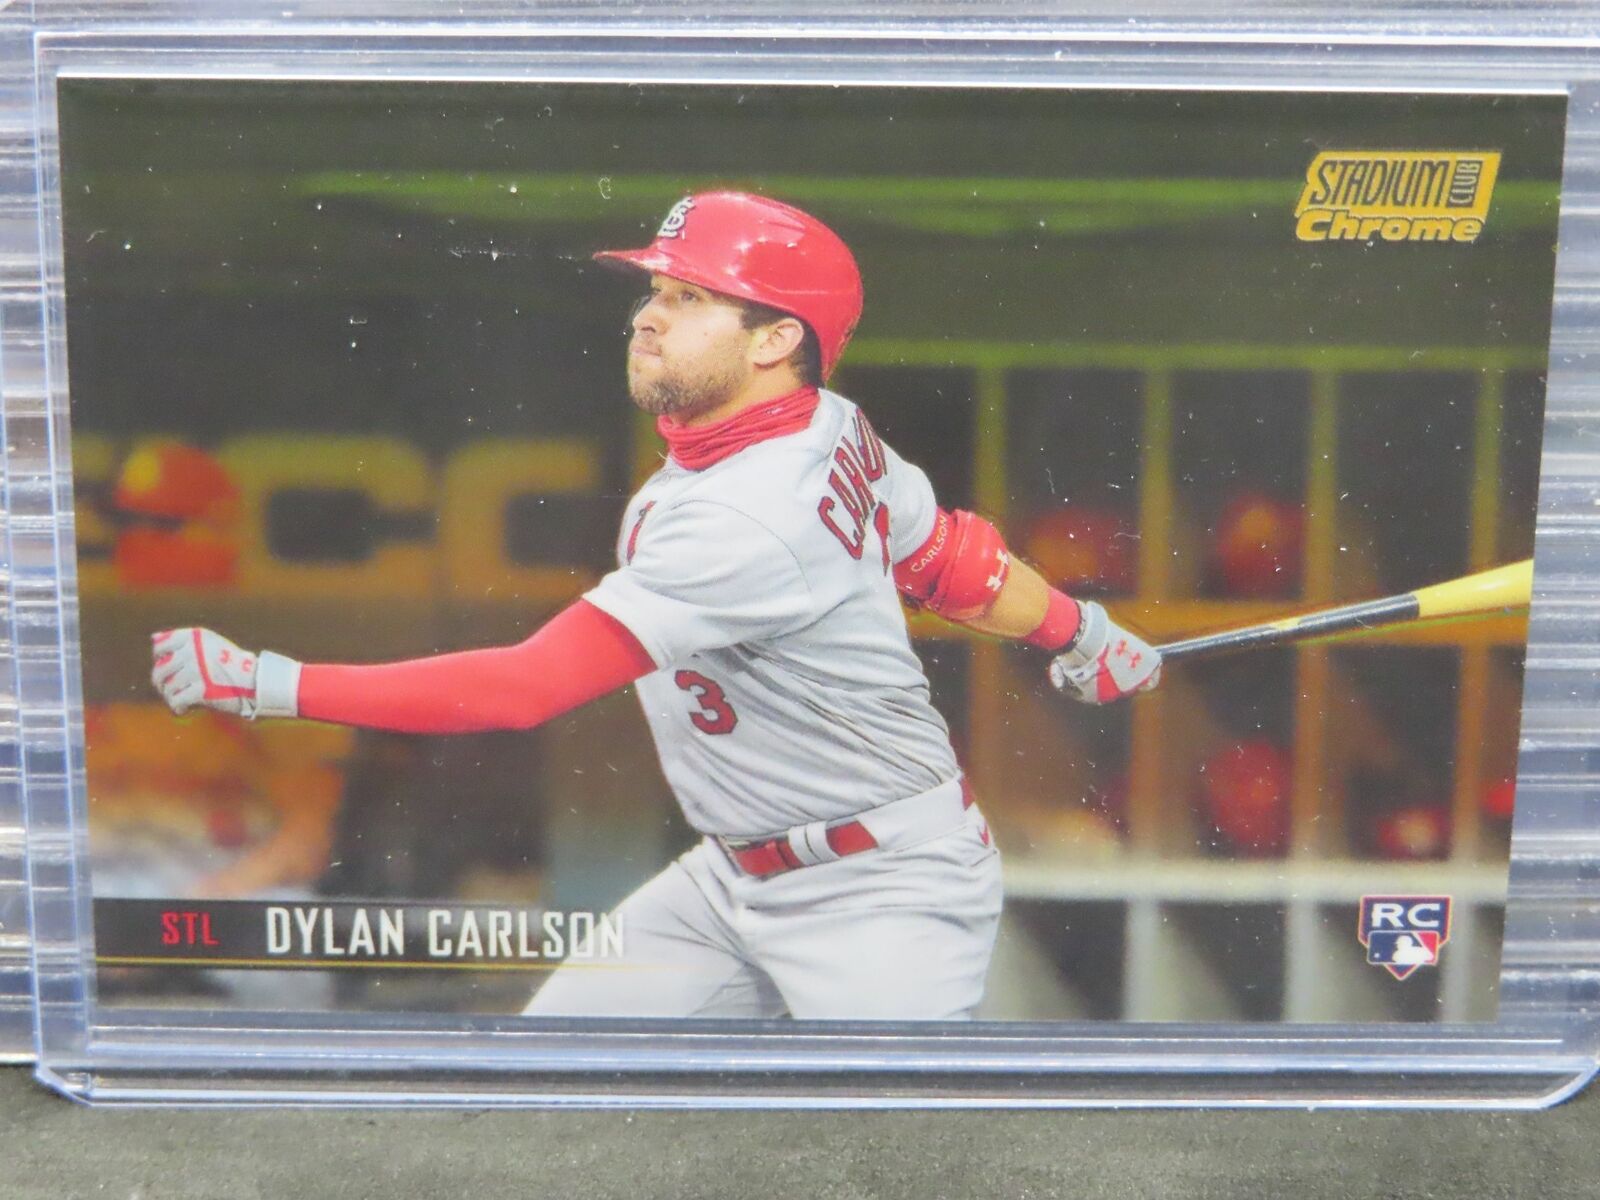 2021 Topps Stadium Club Chrome Dylan Carlson Gold Refractor Rookie RC #5/50 Z134